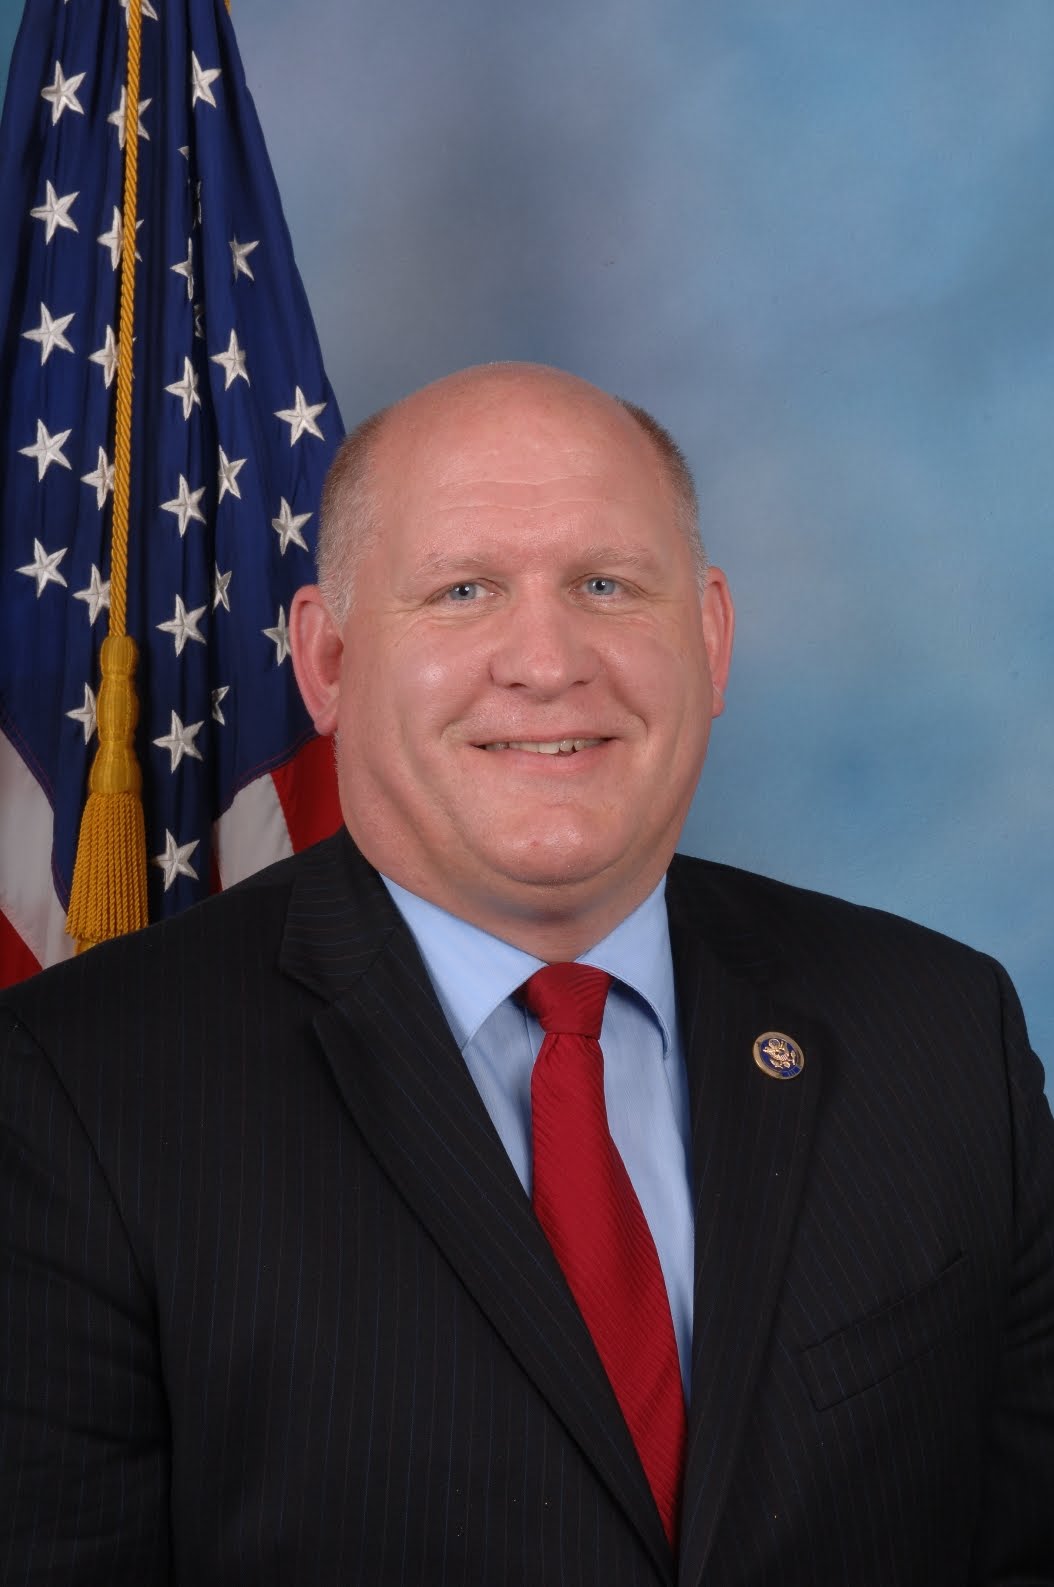 Rep Thompson Official Photo